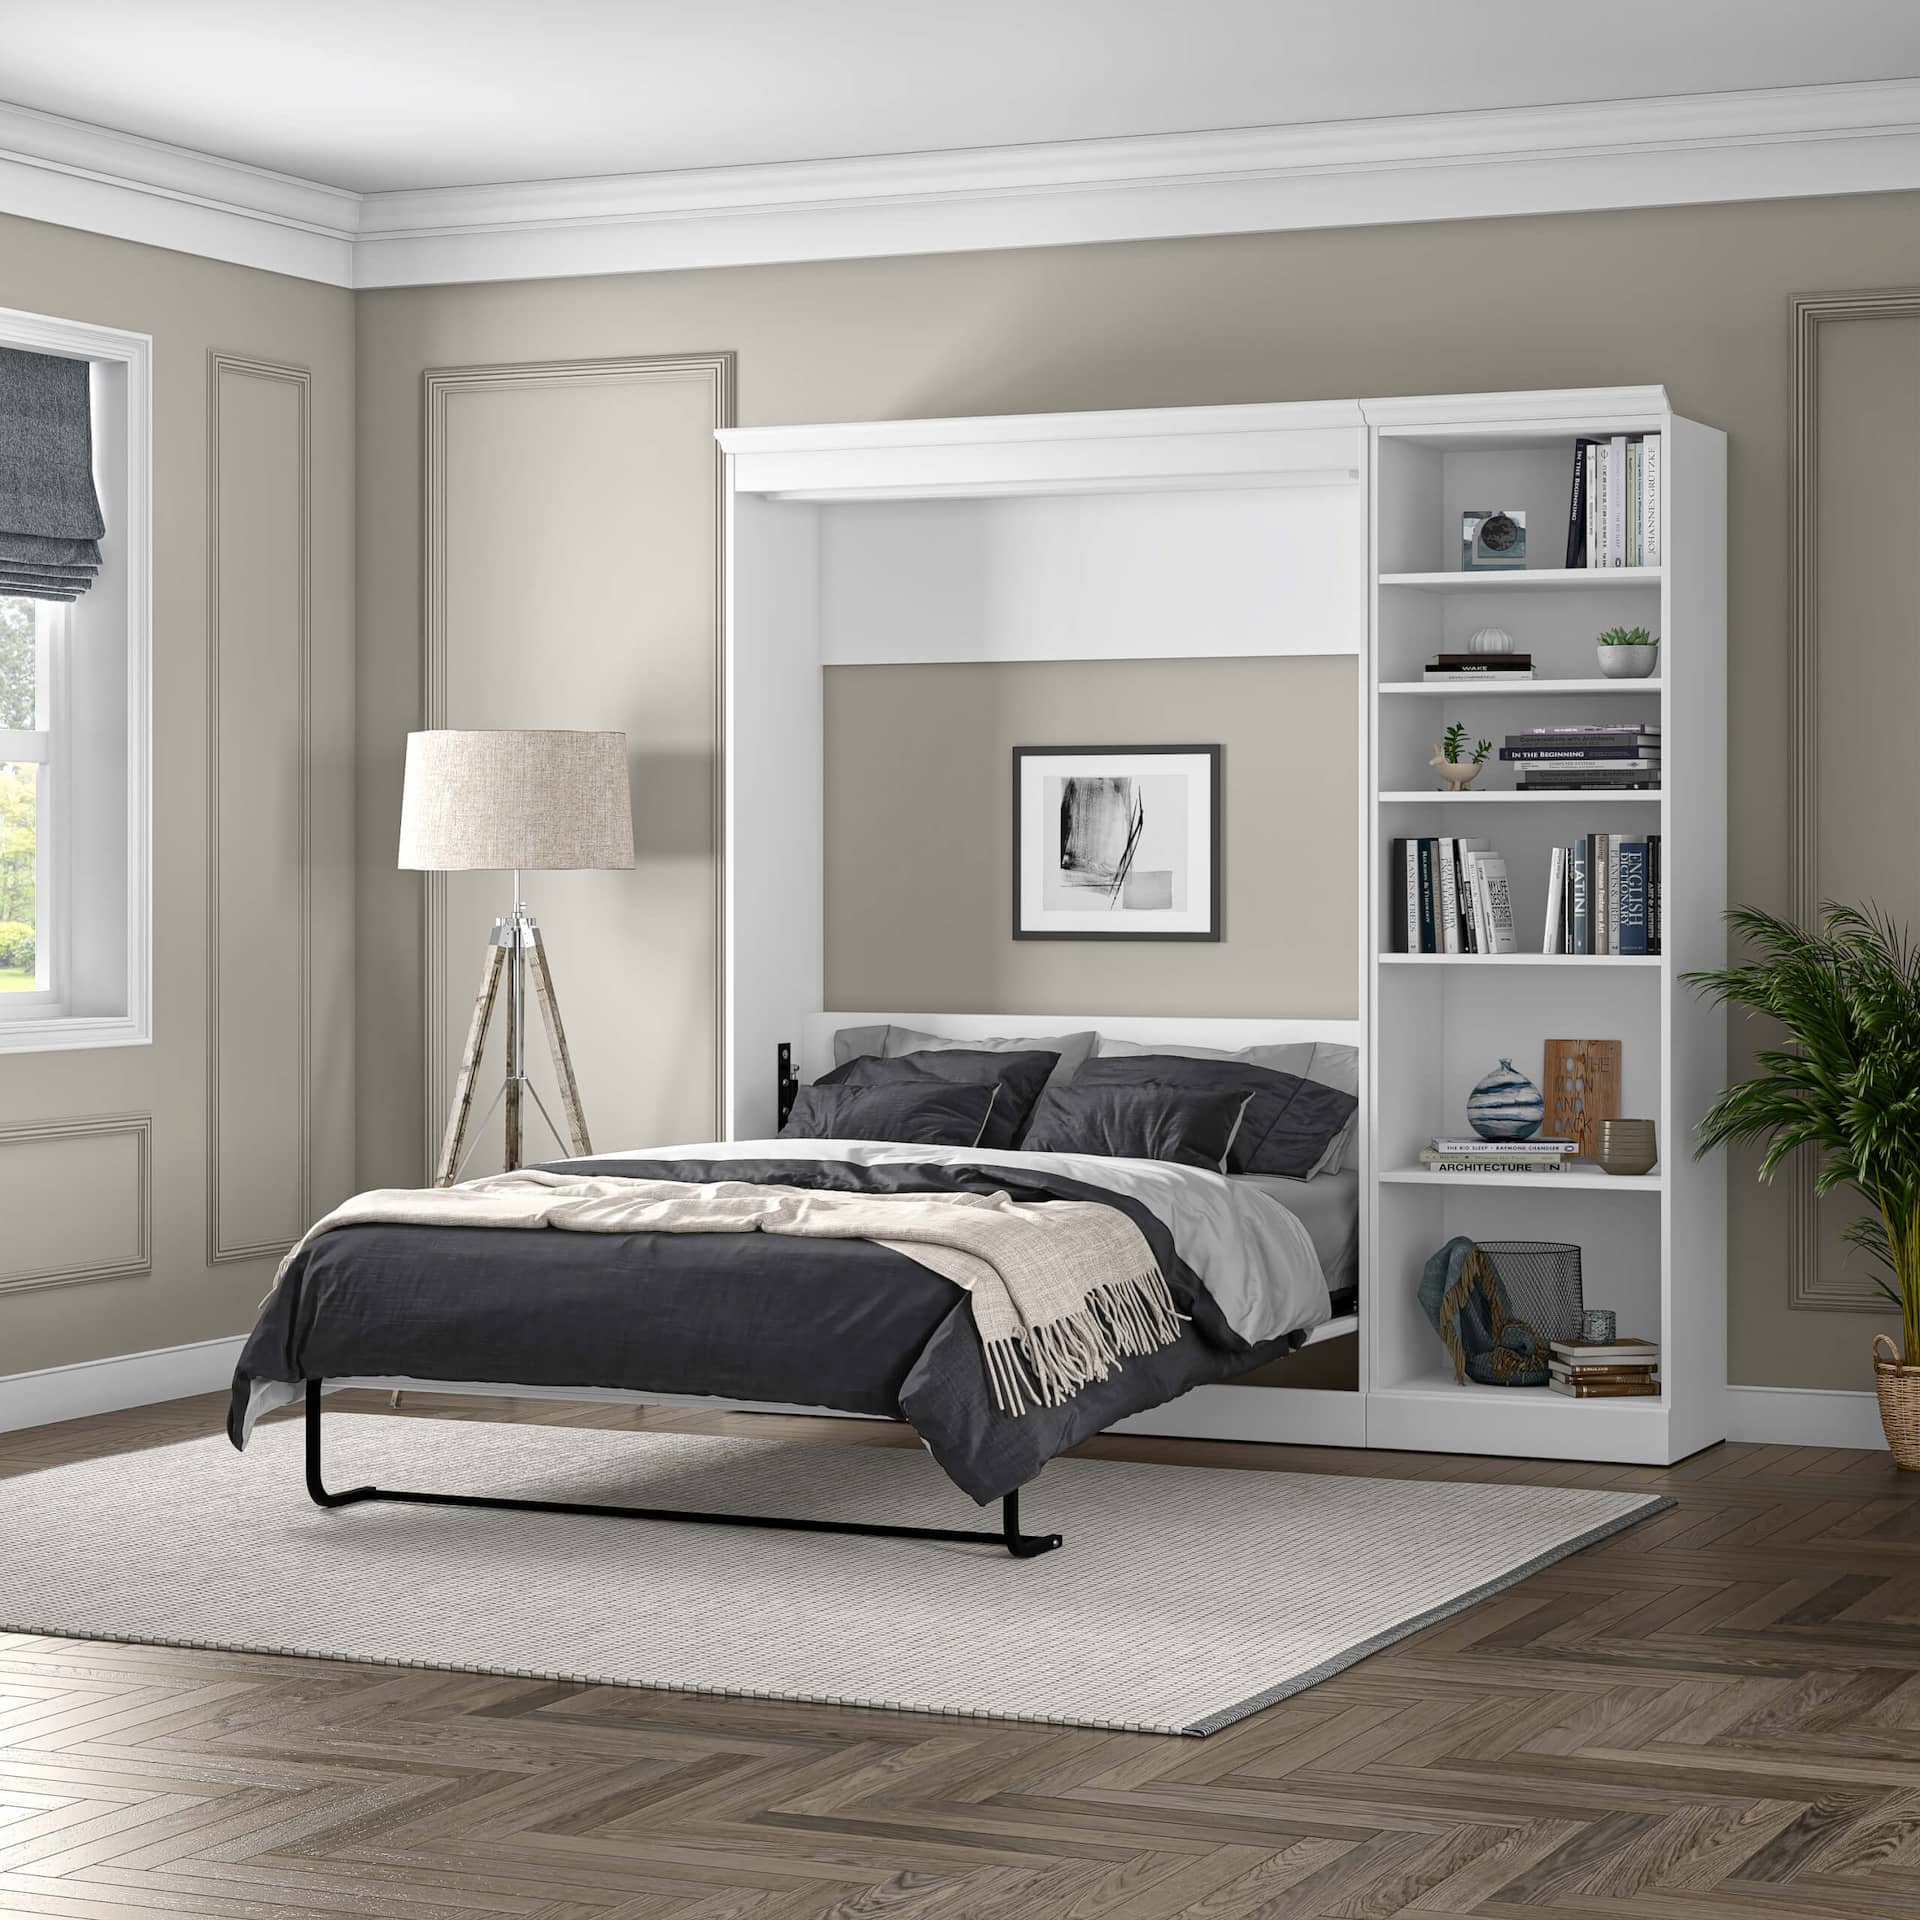 Bestar Murphy bed with storage in a classic decor